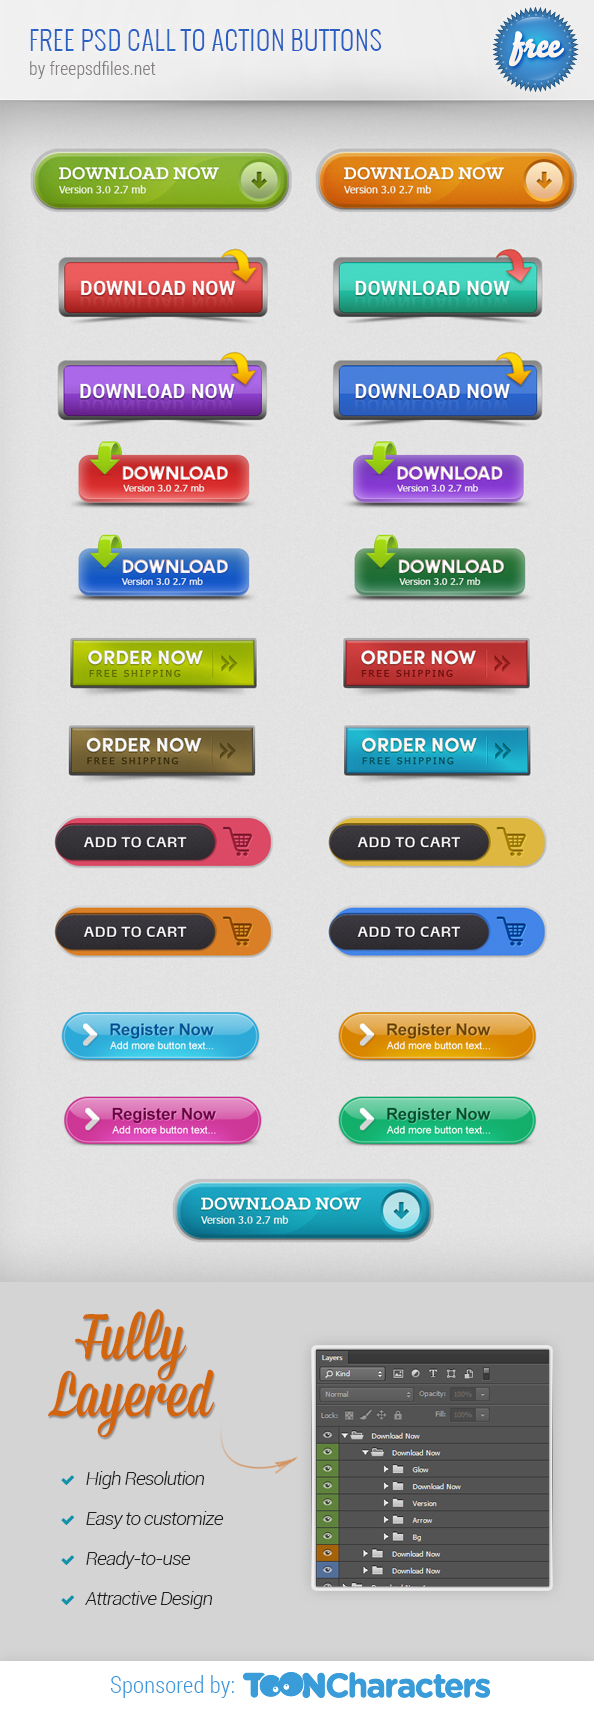 FREE PSD Call to Action Buttons